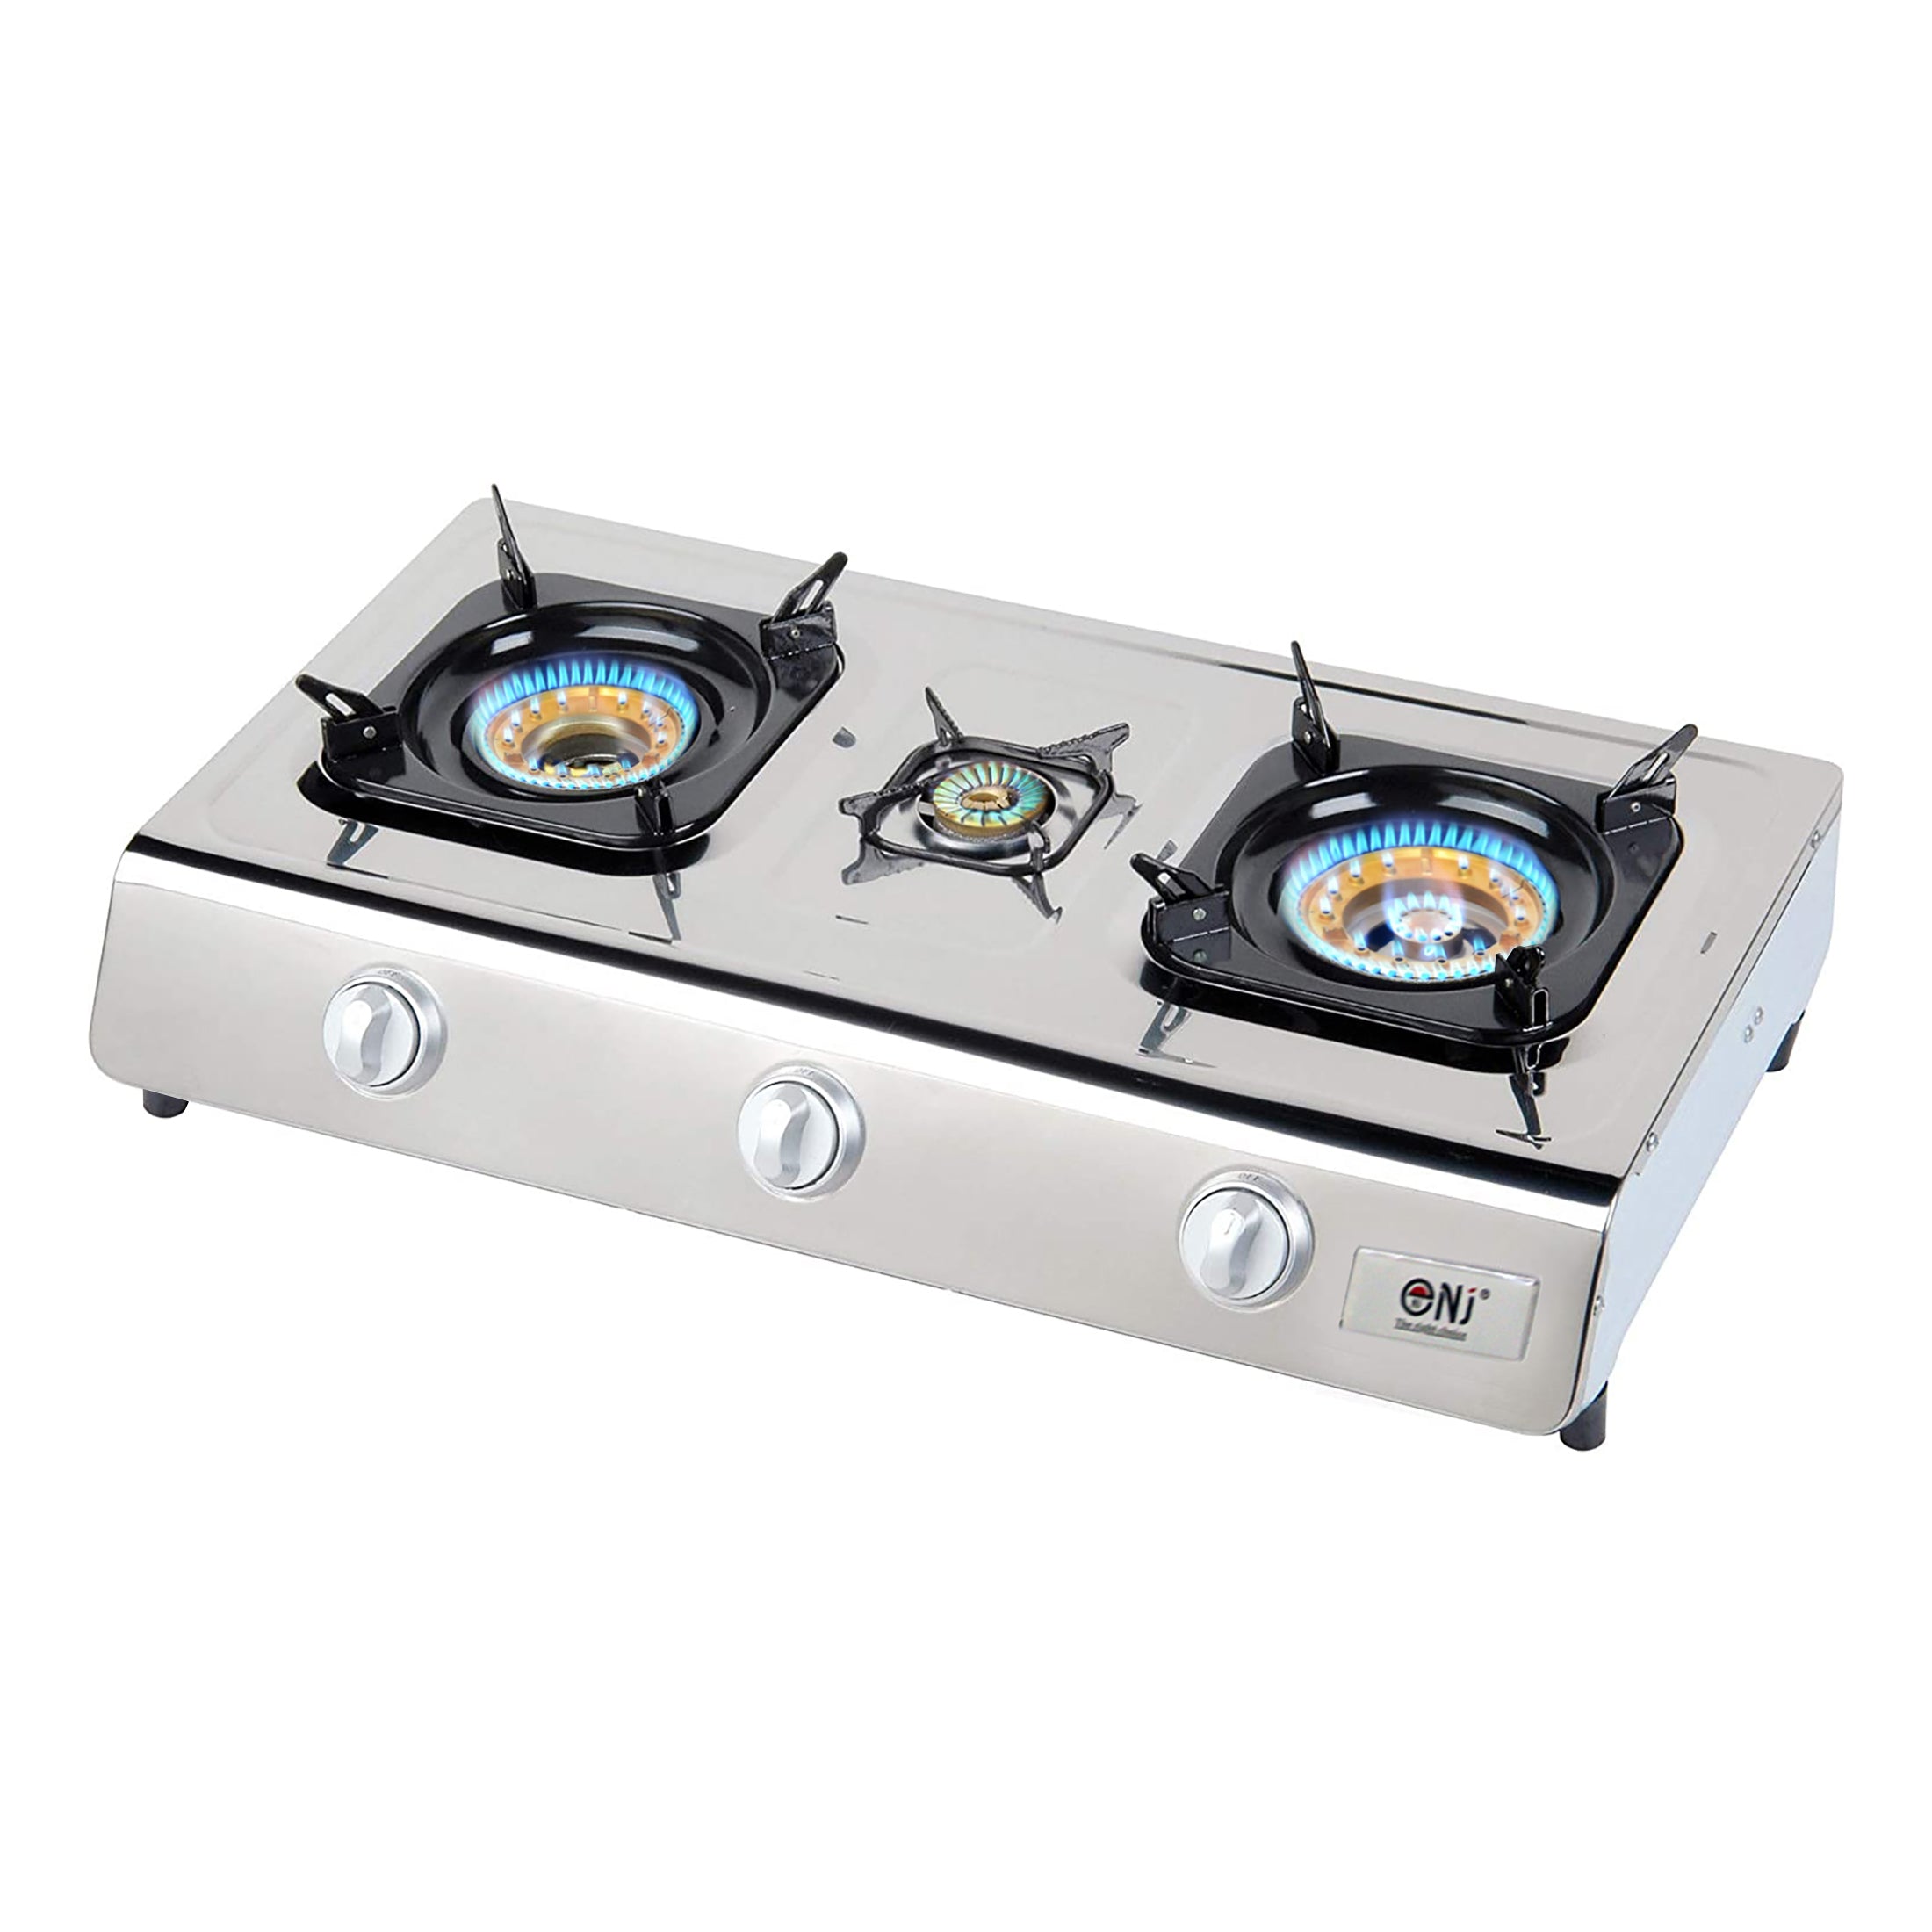 NJ-60SD Portable Camping 2 Burner Gas Stove Double Cooker 60 cm Indoor LPG  